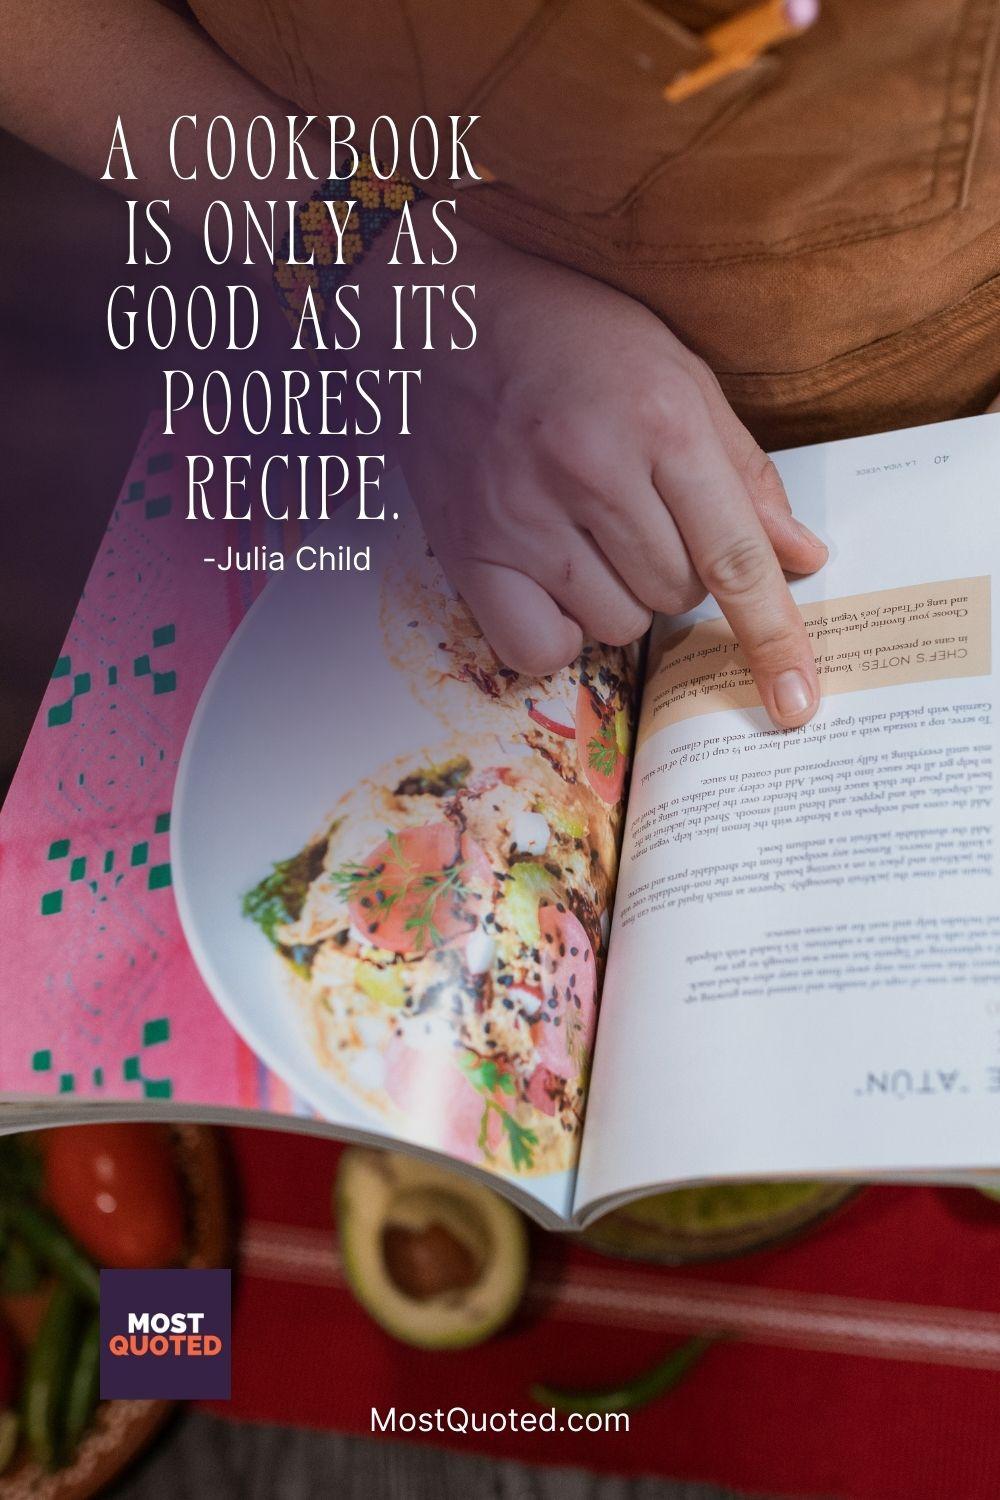 A cookbook is only as good as its poorest recipe. - Julia Child